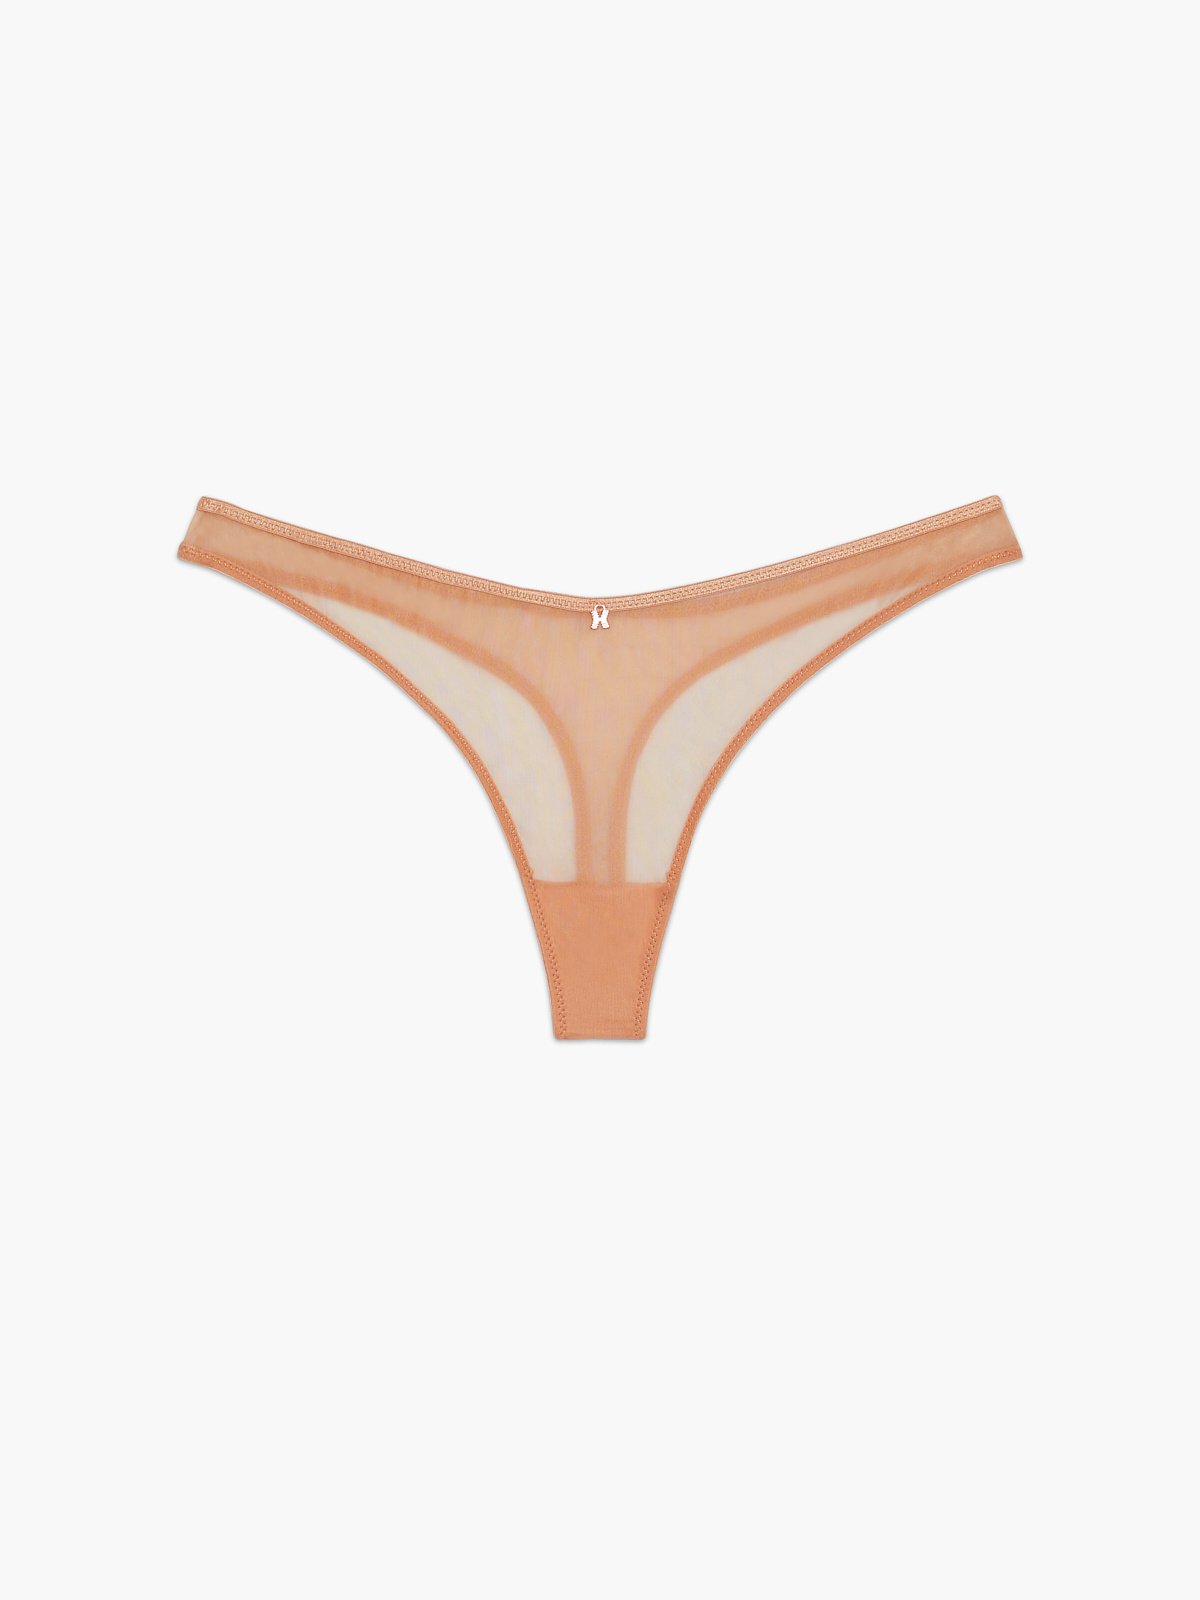 Sheer X Thong Panty In Nude Savage X Fenty Netherlands